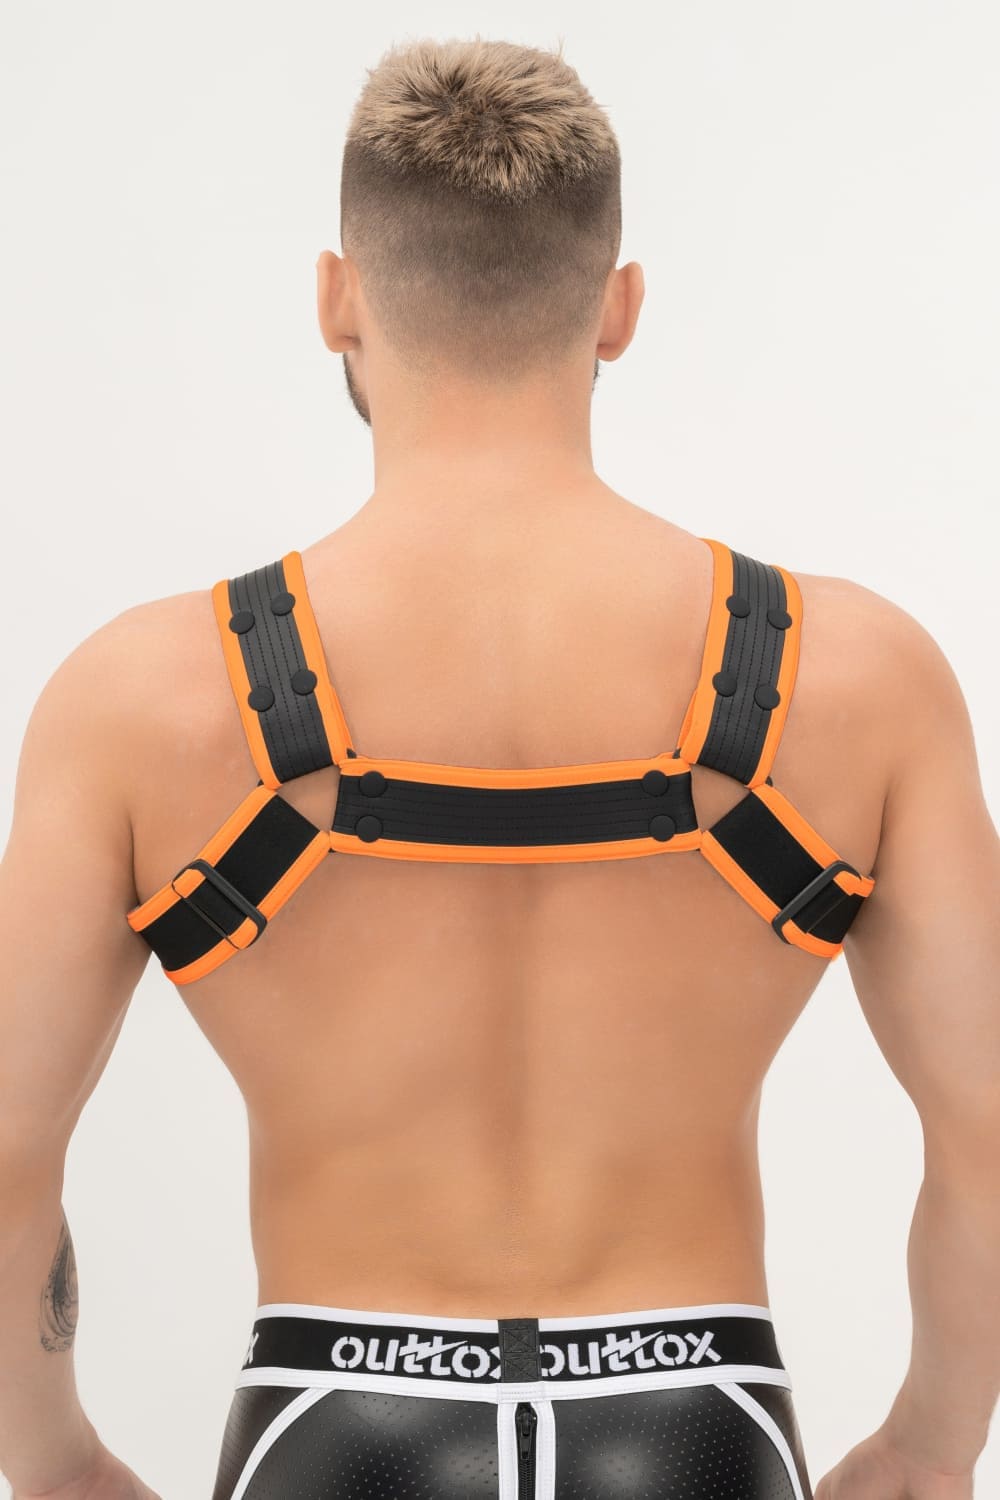 Outtox. Body Harness with Snaps. Black+Orange